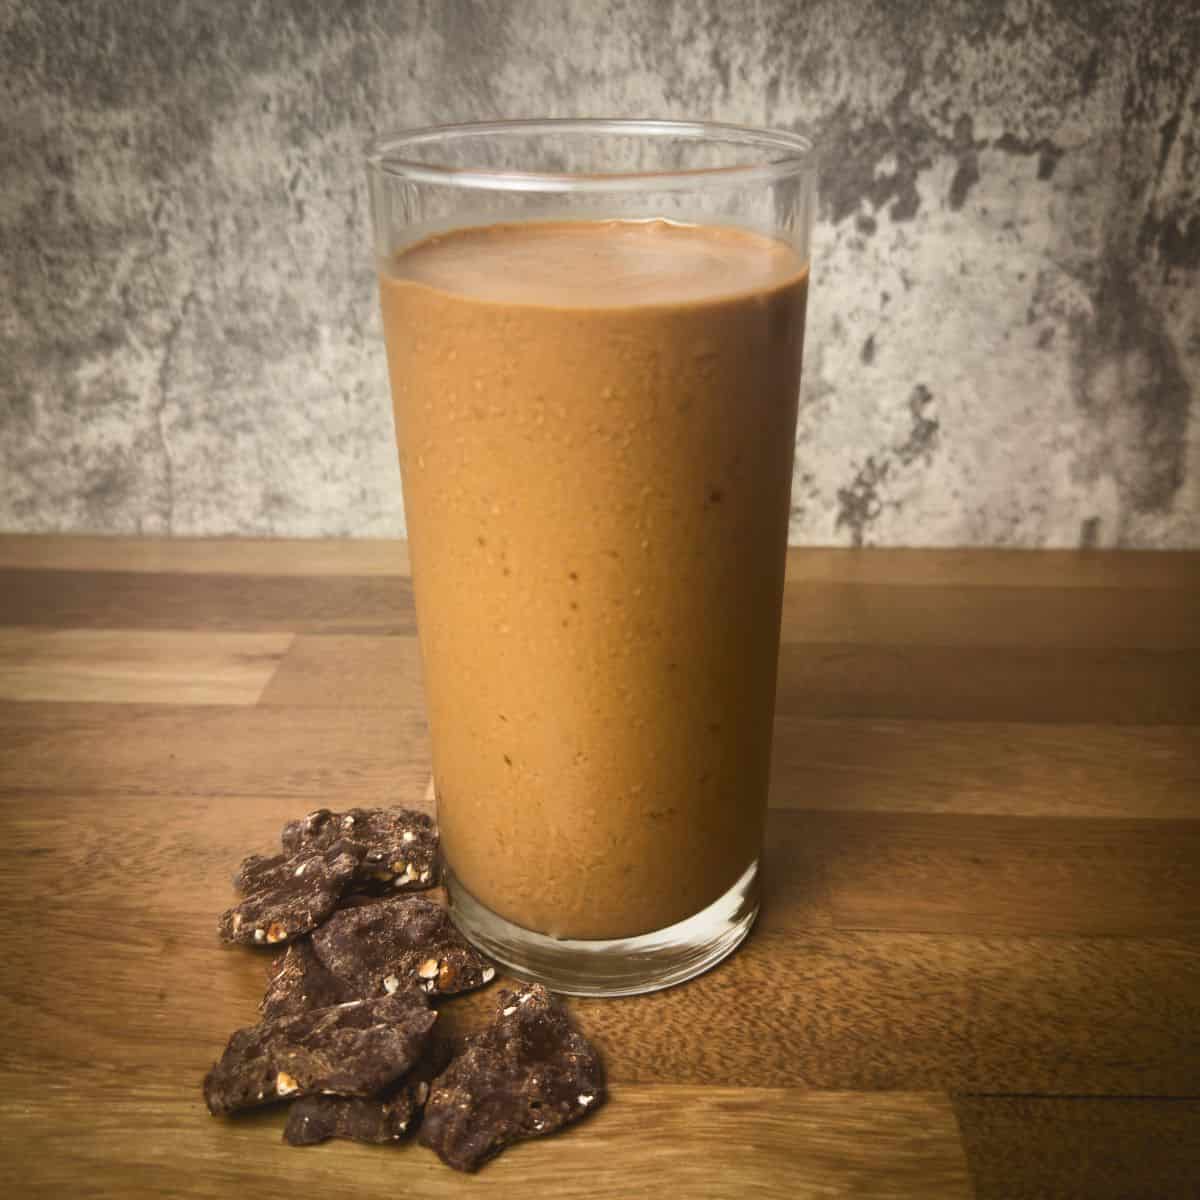 A freshly blended Tropical Smoothie Peanut Butter Cup served in a clear glass, accompanied by chocolate peanut clusters, against a rustic grey background.